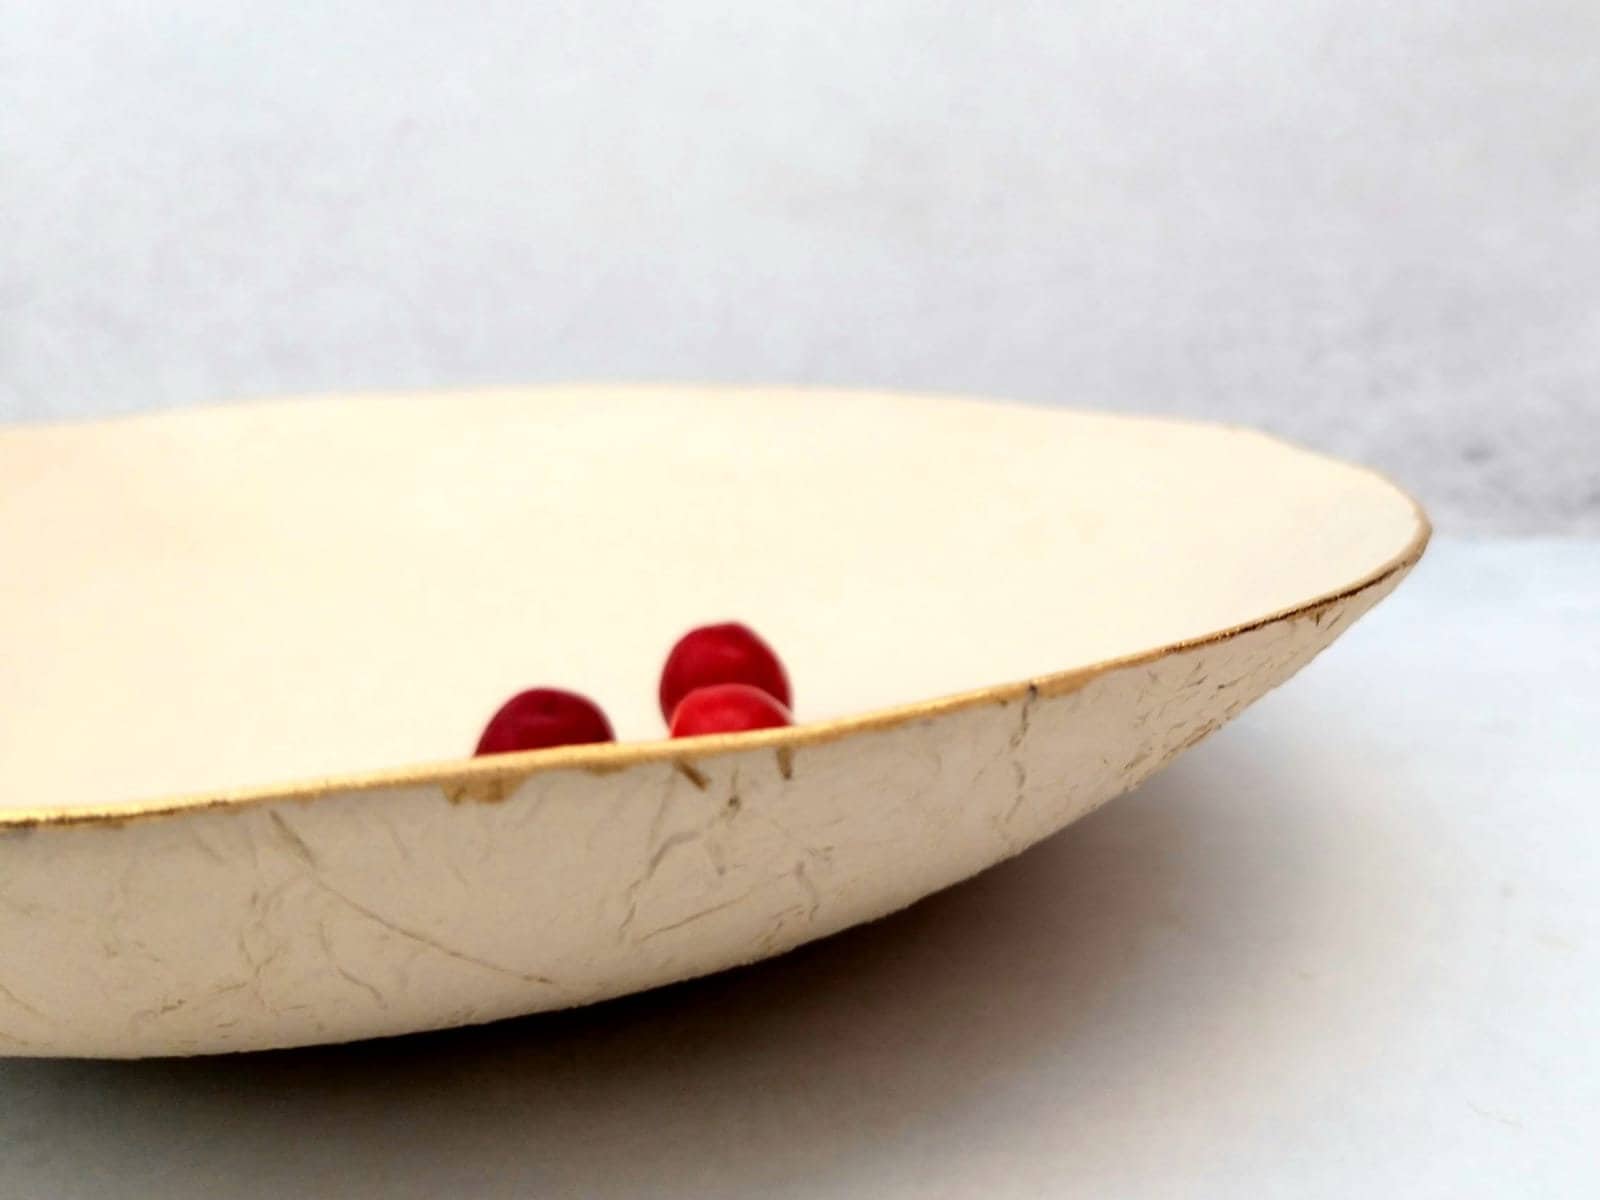 Large Ceramic Fruit Bowl: Modern Pottery Centerpiece for Serving and  Decoration